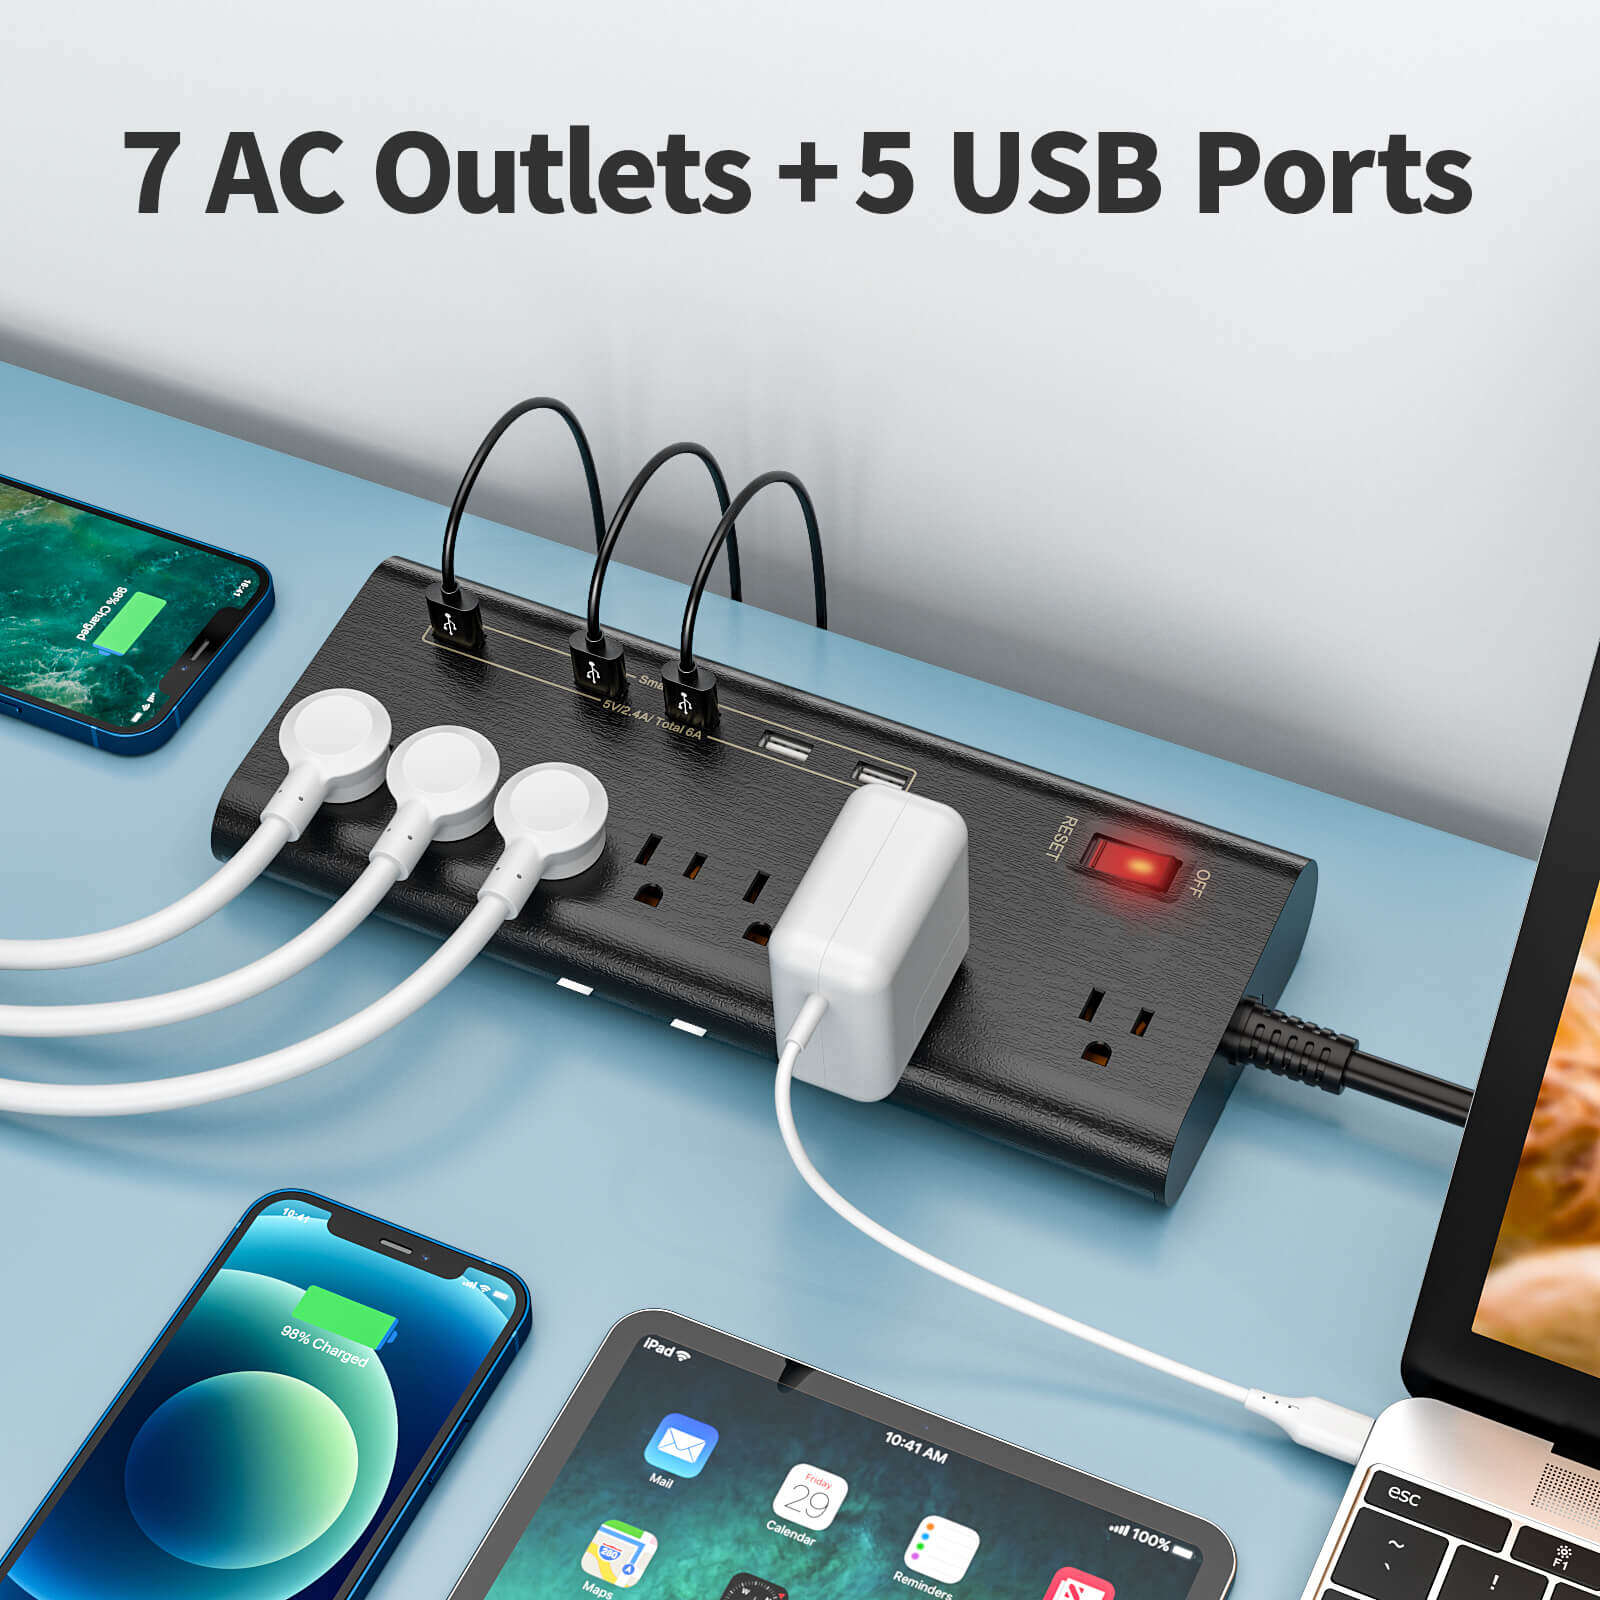 outdoor rated power strips, outlet surge protector power strip, plugging multiple power strips